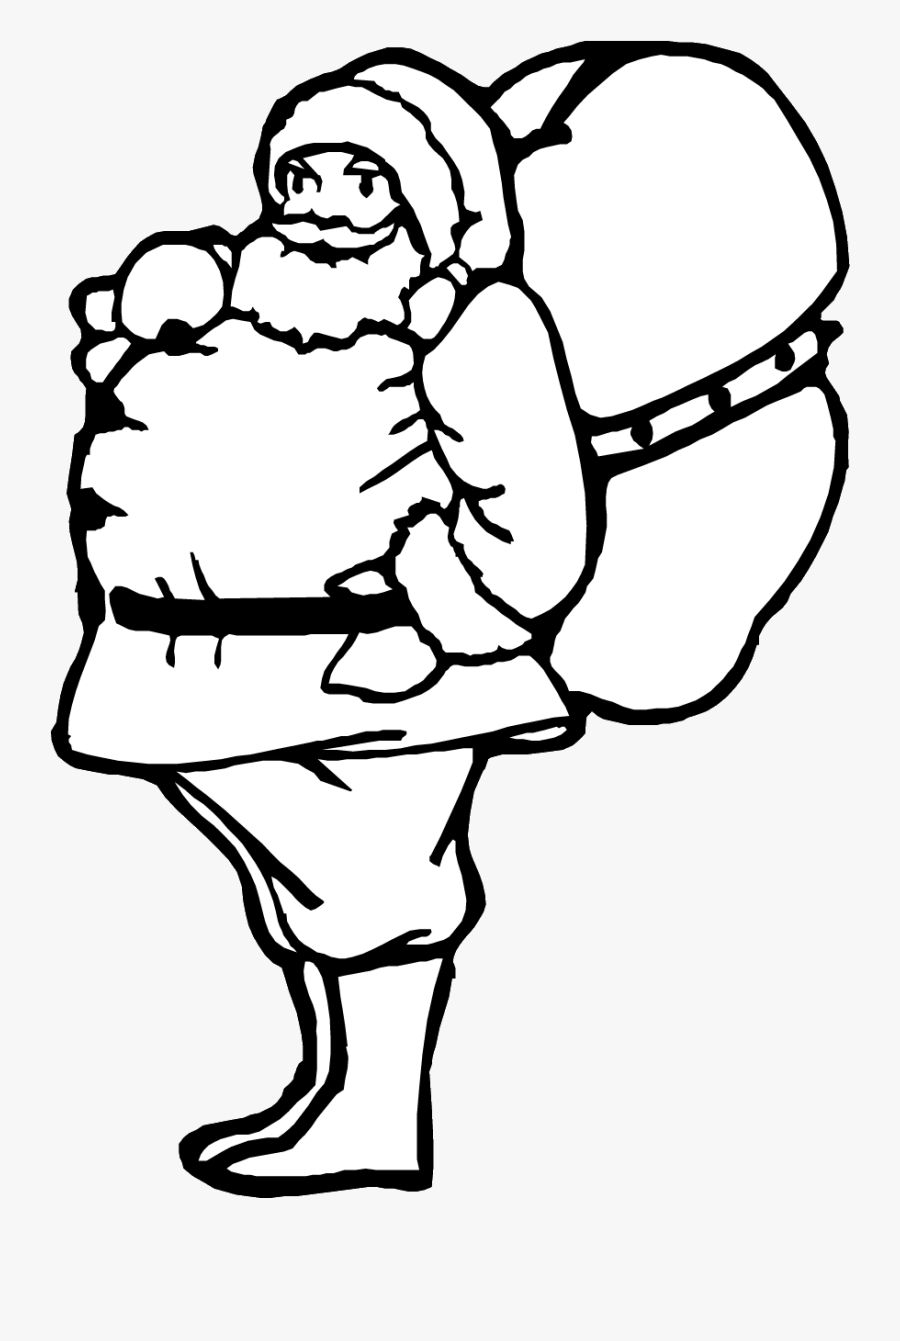 Santa"s Bag Of Toys Coloring Page Printable Christmas - Santa With Sack Coloring Pages, Transparent Clipart